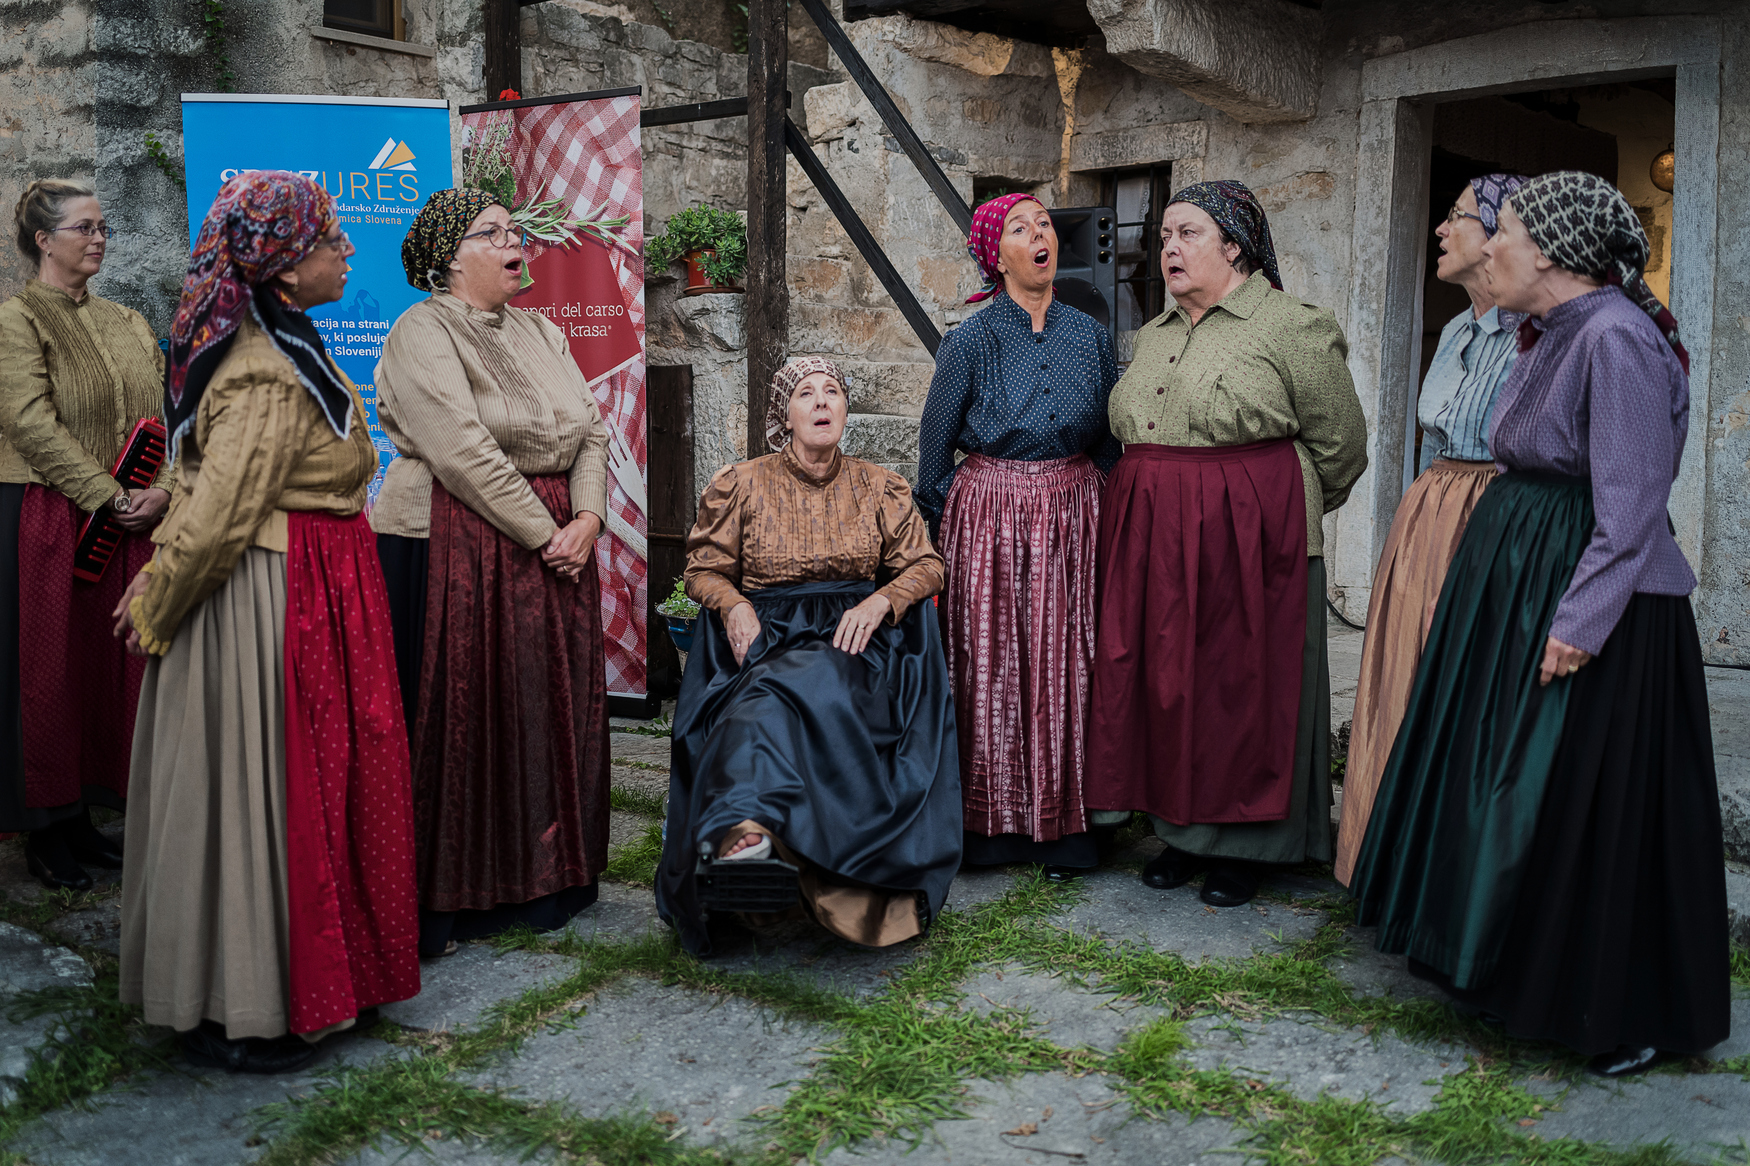 Radivoj Mosetti, Italia: Opening of Karst Wedding Traditional Event, Repen Village, 2018, A Hundred People – Women from the Valley, Italy - Women from the Valley is a Slovenian cross-border singing group from Trieste folklore society Stu ledi (A Hundred People). While choir members feel best when performing on concert stages, folk singers love to sing outdoors in the villages and nothing can stop them at such lovely events.